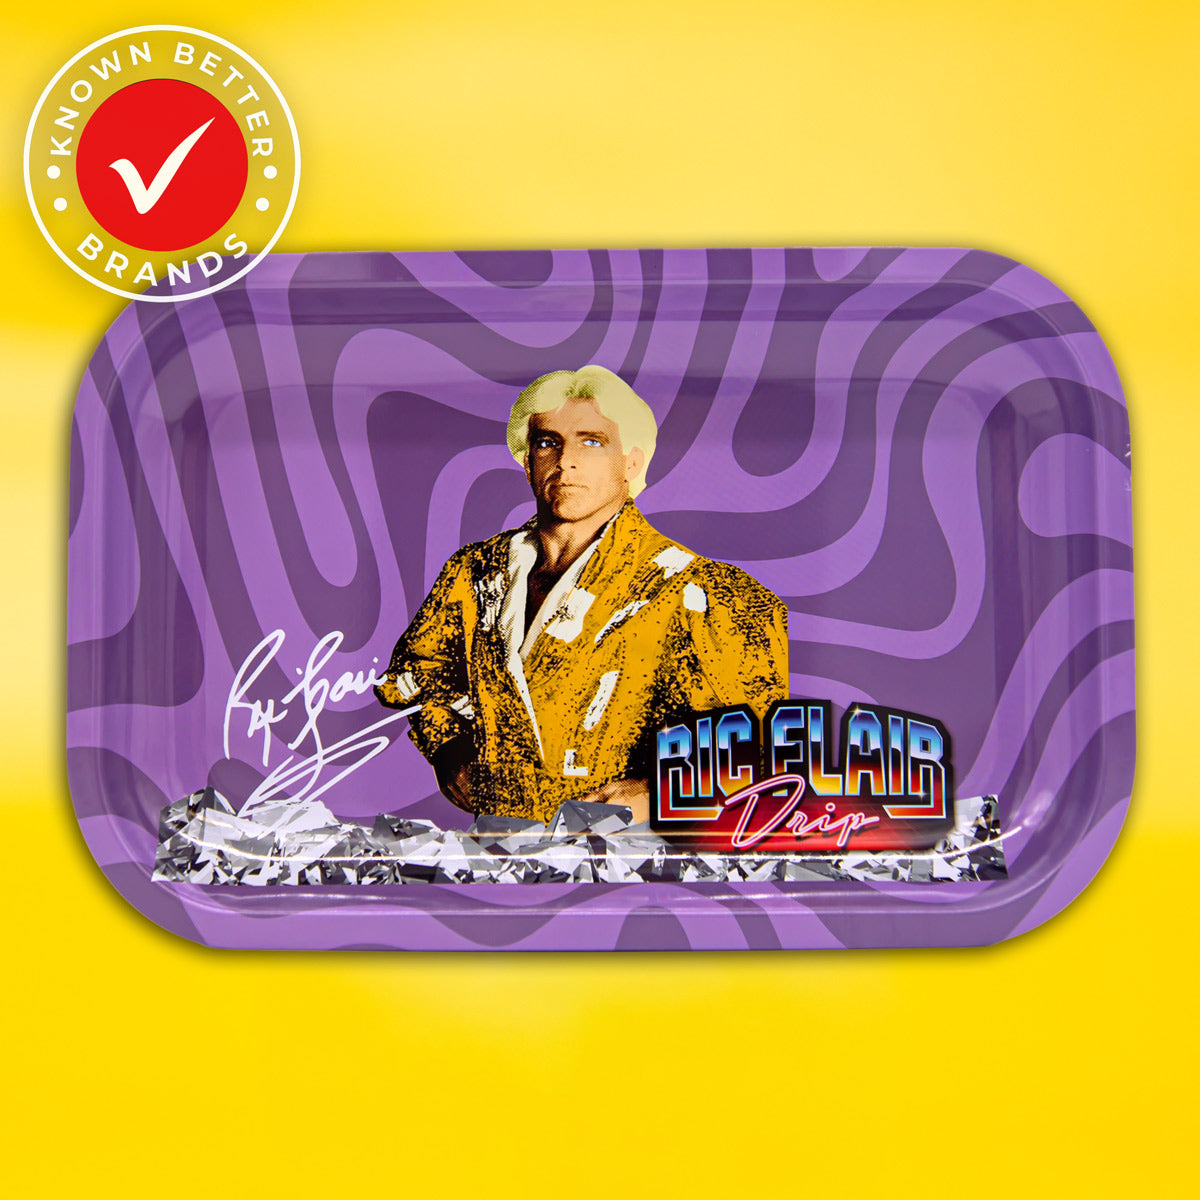 Stand Tall Rolling Tray | Ric Flair Drip - Cool, stylish, and confident smoke session inspiration by Nature Boy. Dripped in diamonds, this tray exudes pure charisma. Official RFD Product in various sizes.